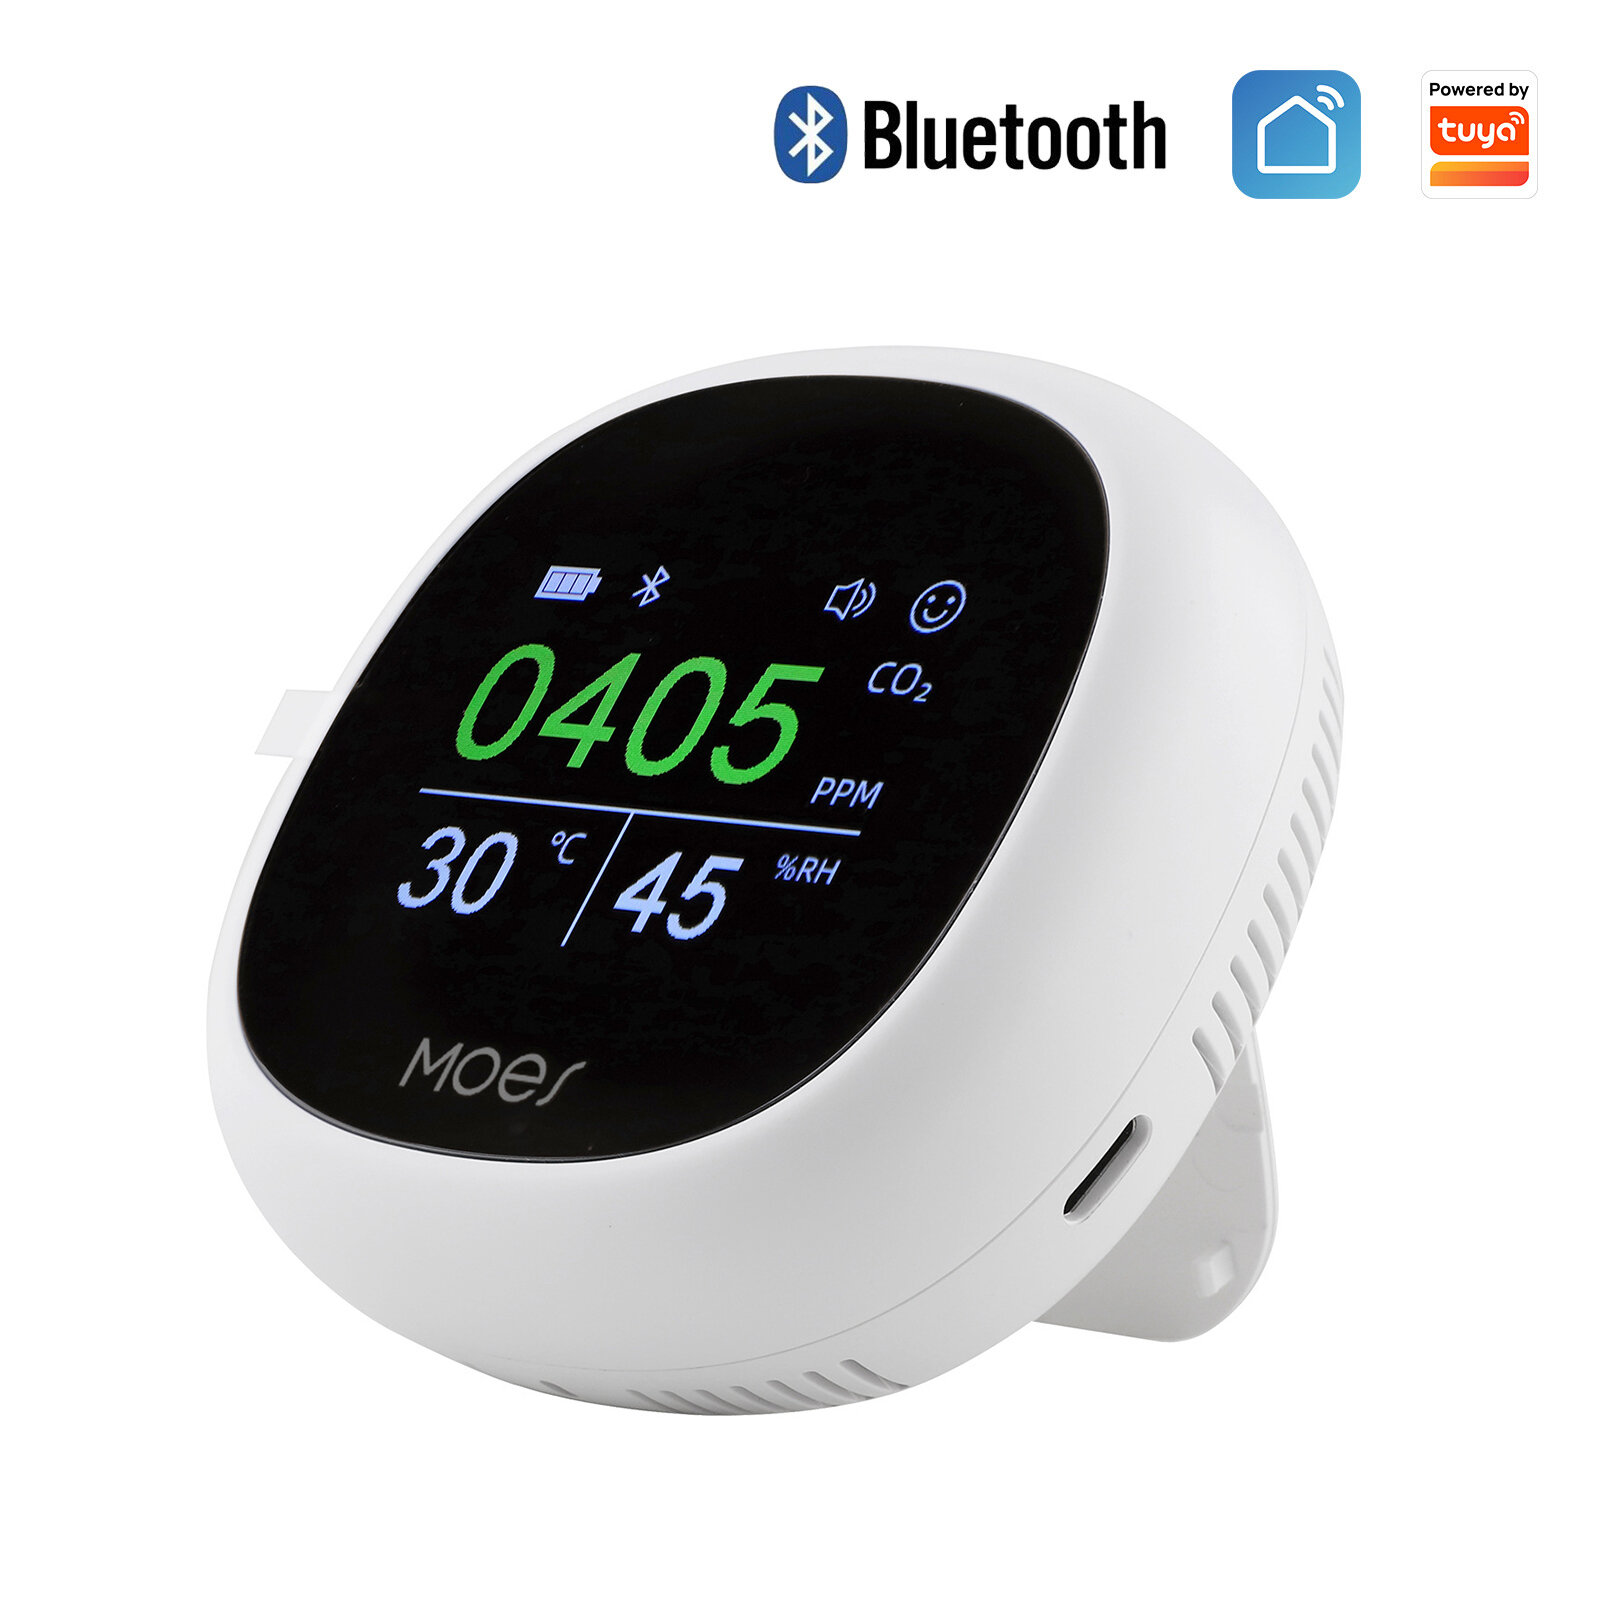 MoesHouse Tuya bluetooth 3 in 1 Multi-functional Air Monitor Temperature Humidity Carbon Dioxide Sensor with Alarm Clock